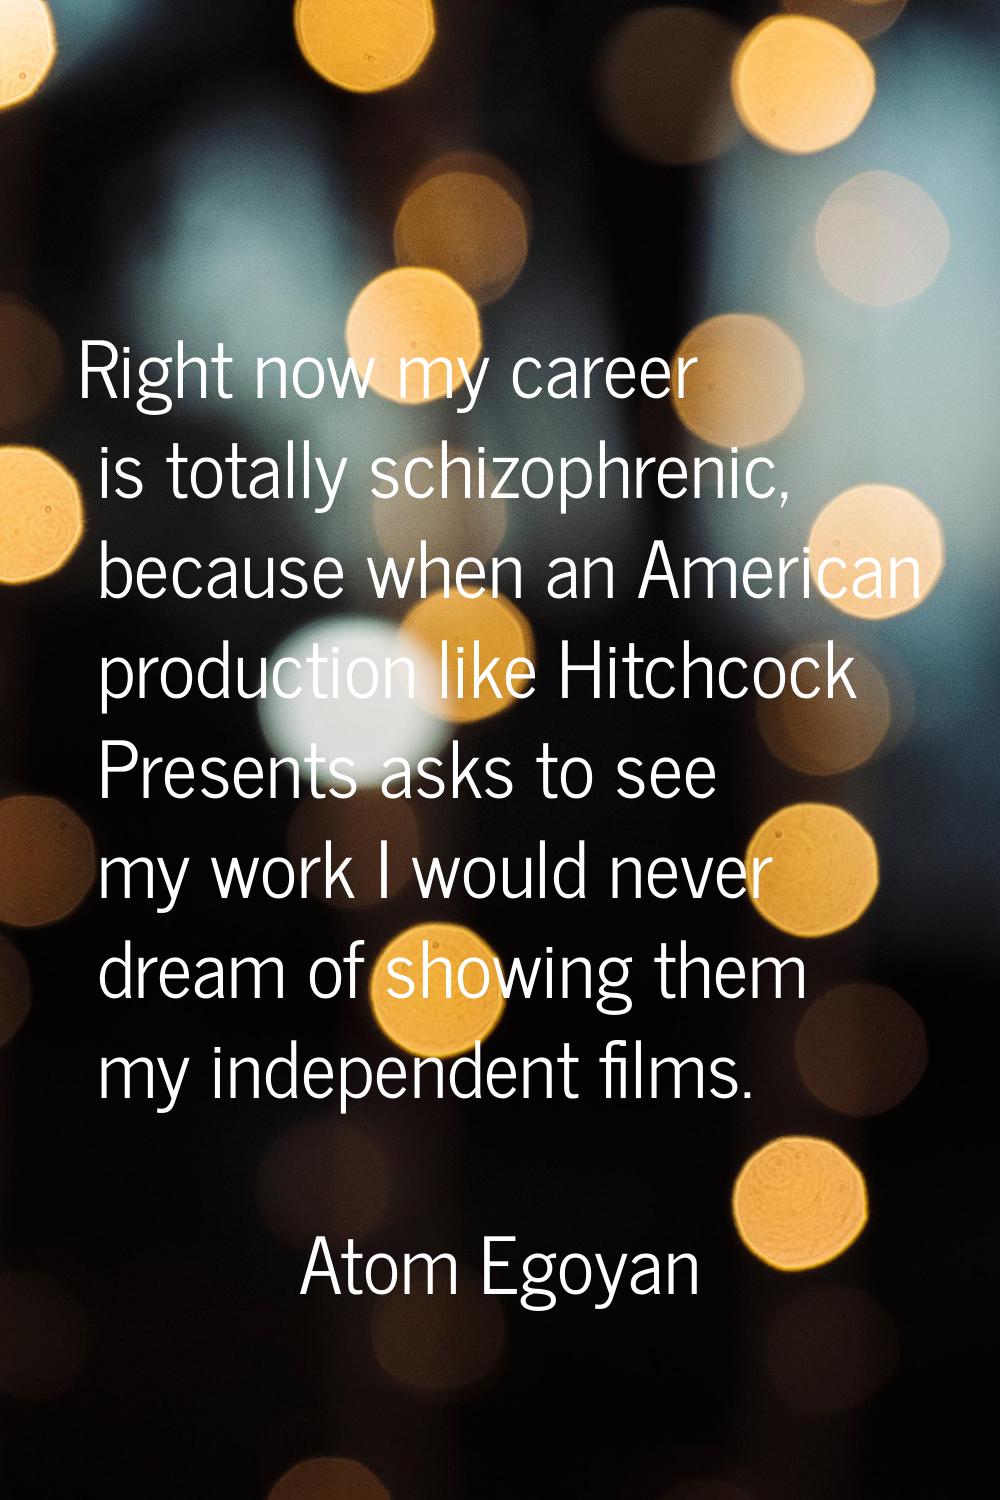 Right now my career is totally schizophrenic, because when an American production like Hitchcock Pr